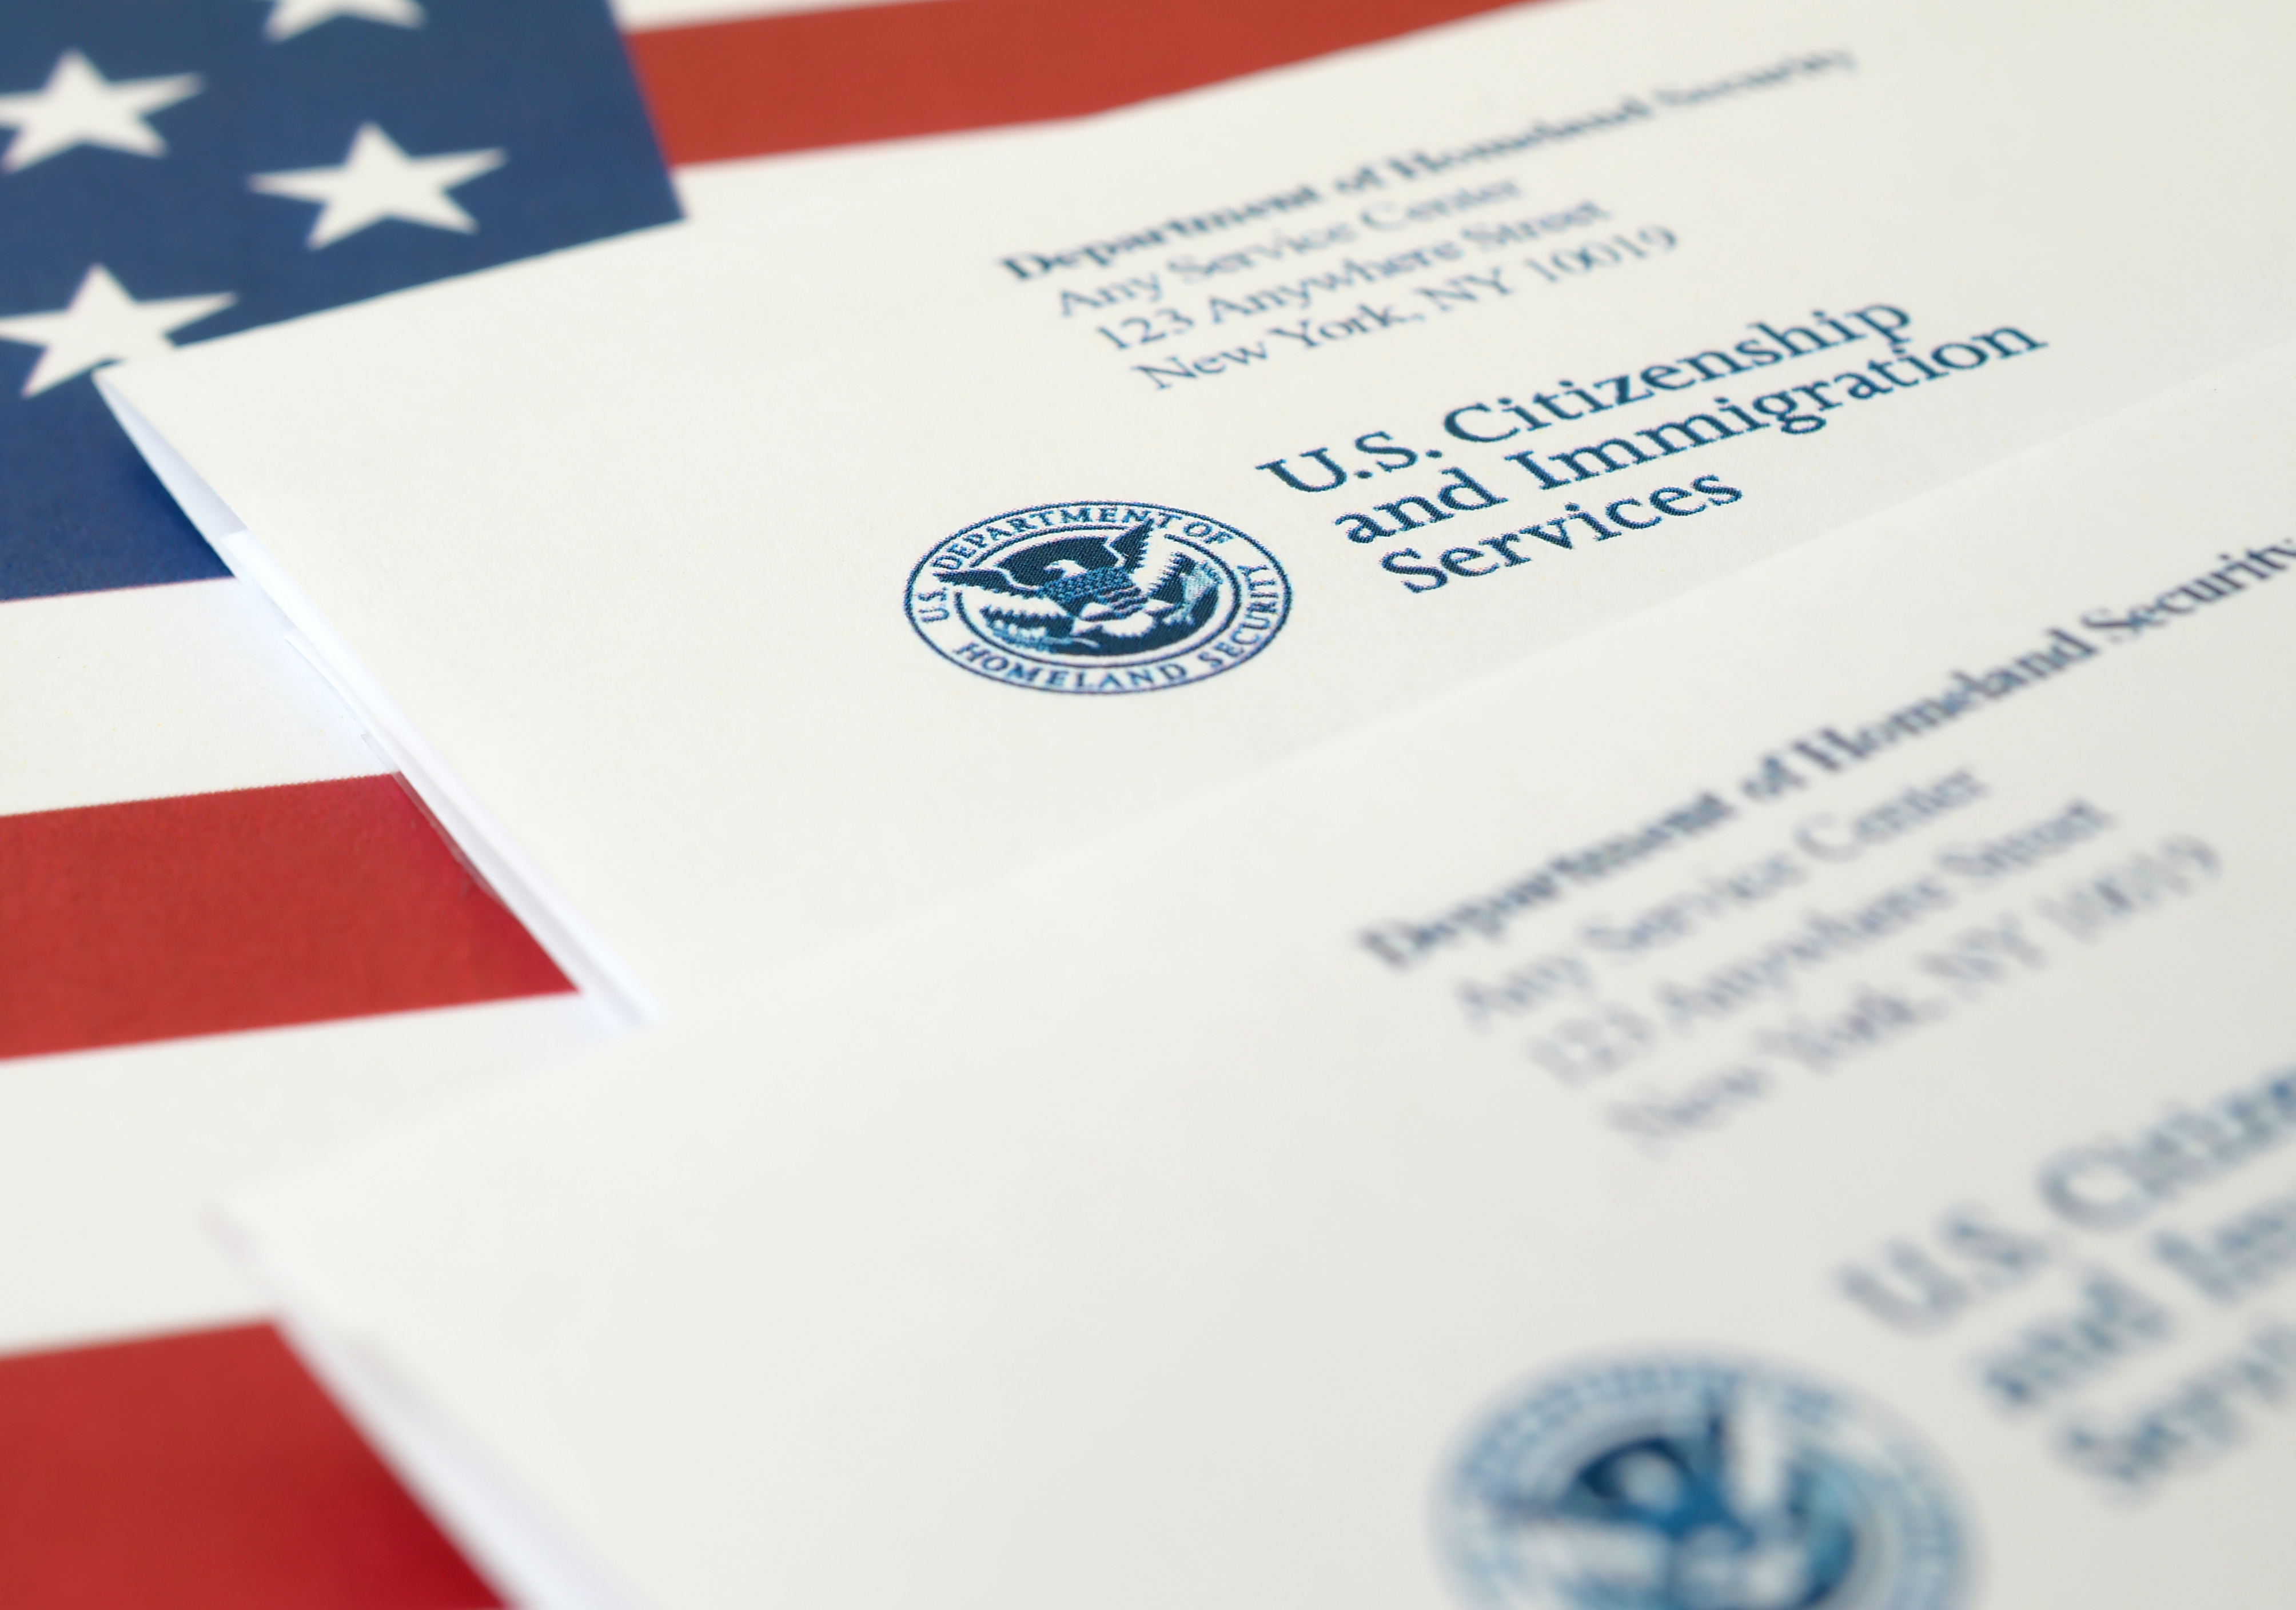 USCIS Announces Flexibilities for Certain Foreign Student Applicants Affected by Delayed Receipt Notices for Form I-765, Application for Employment Authorization